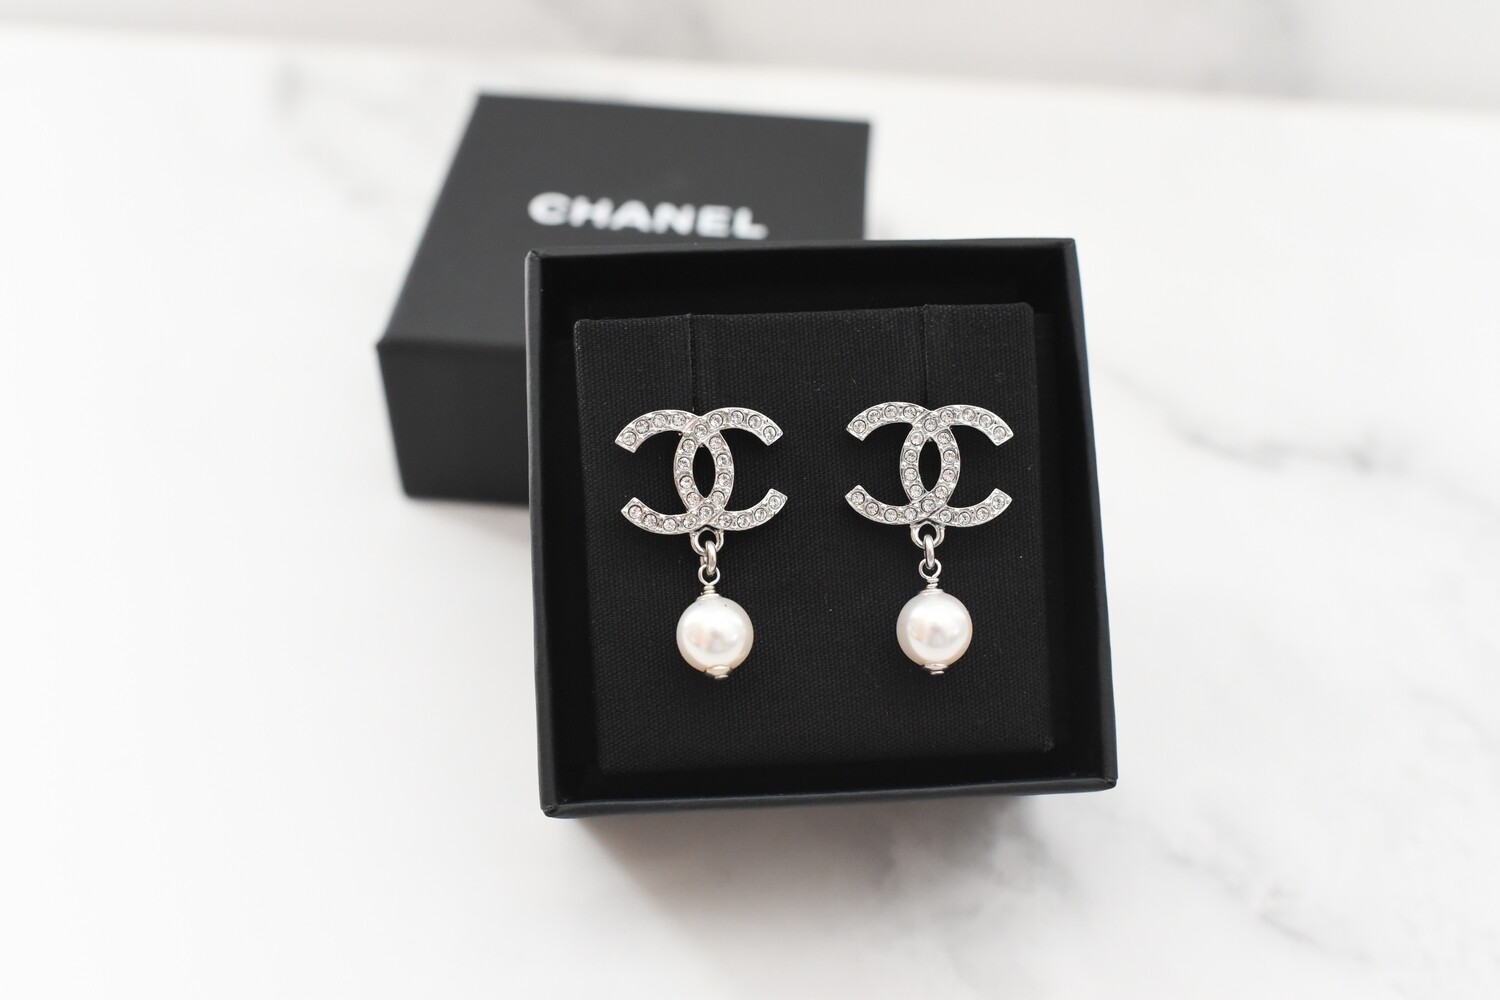 Chanel Earrings Silver with Crystal and Pearl Drop, New in Box GA001